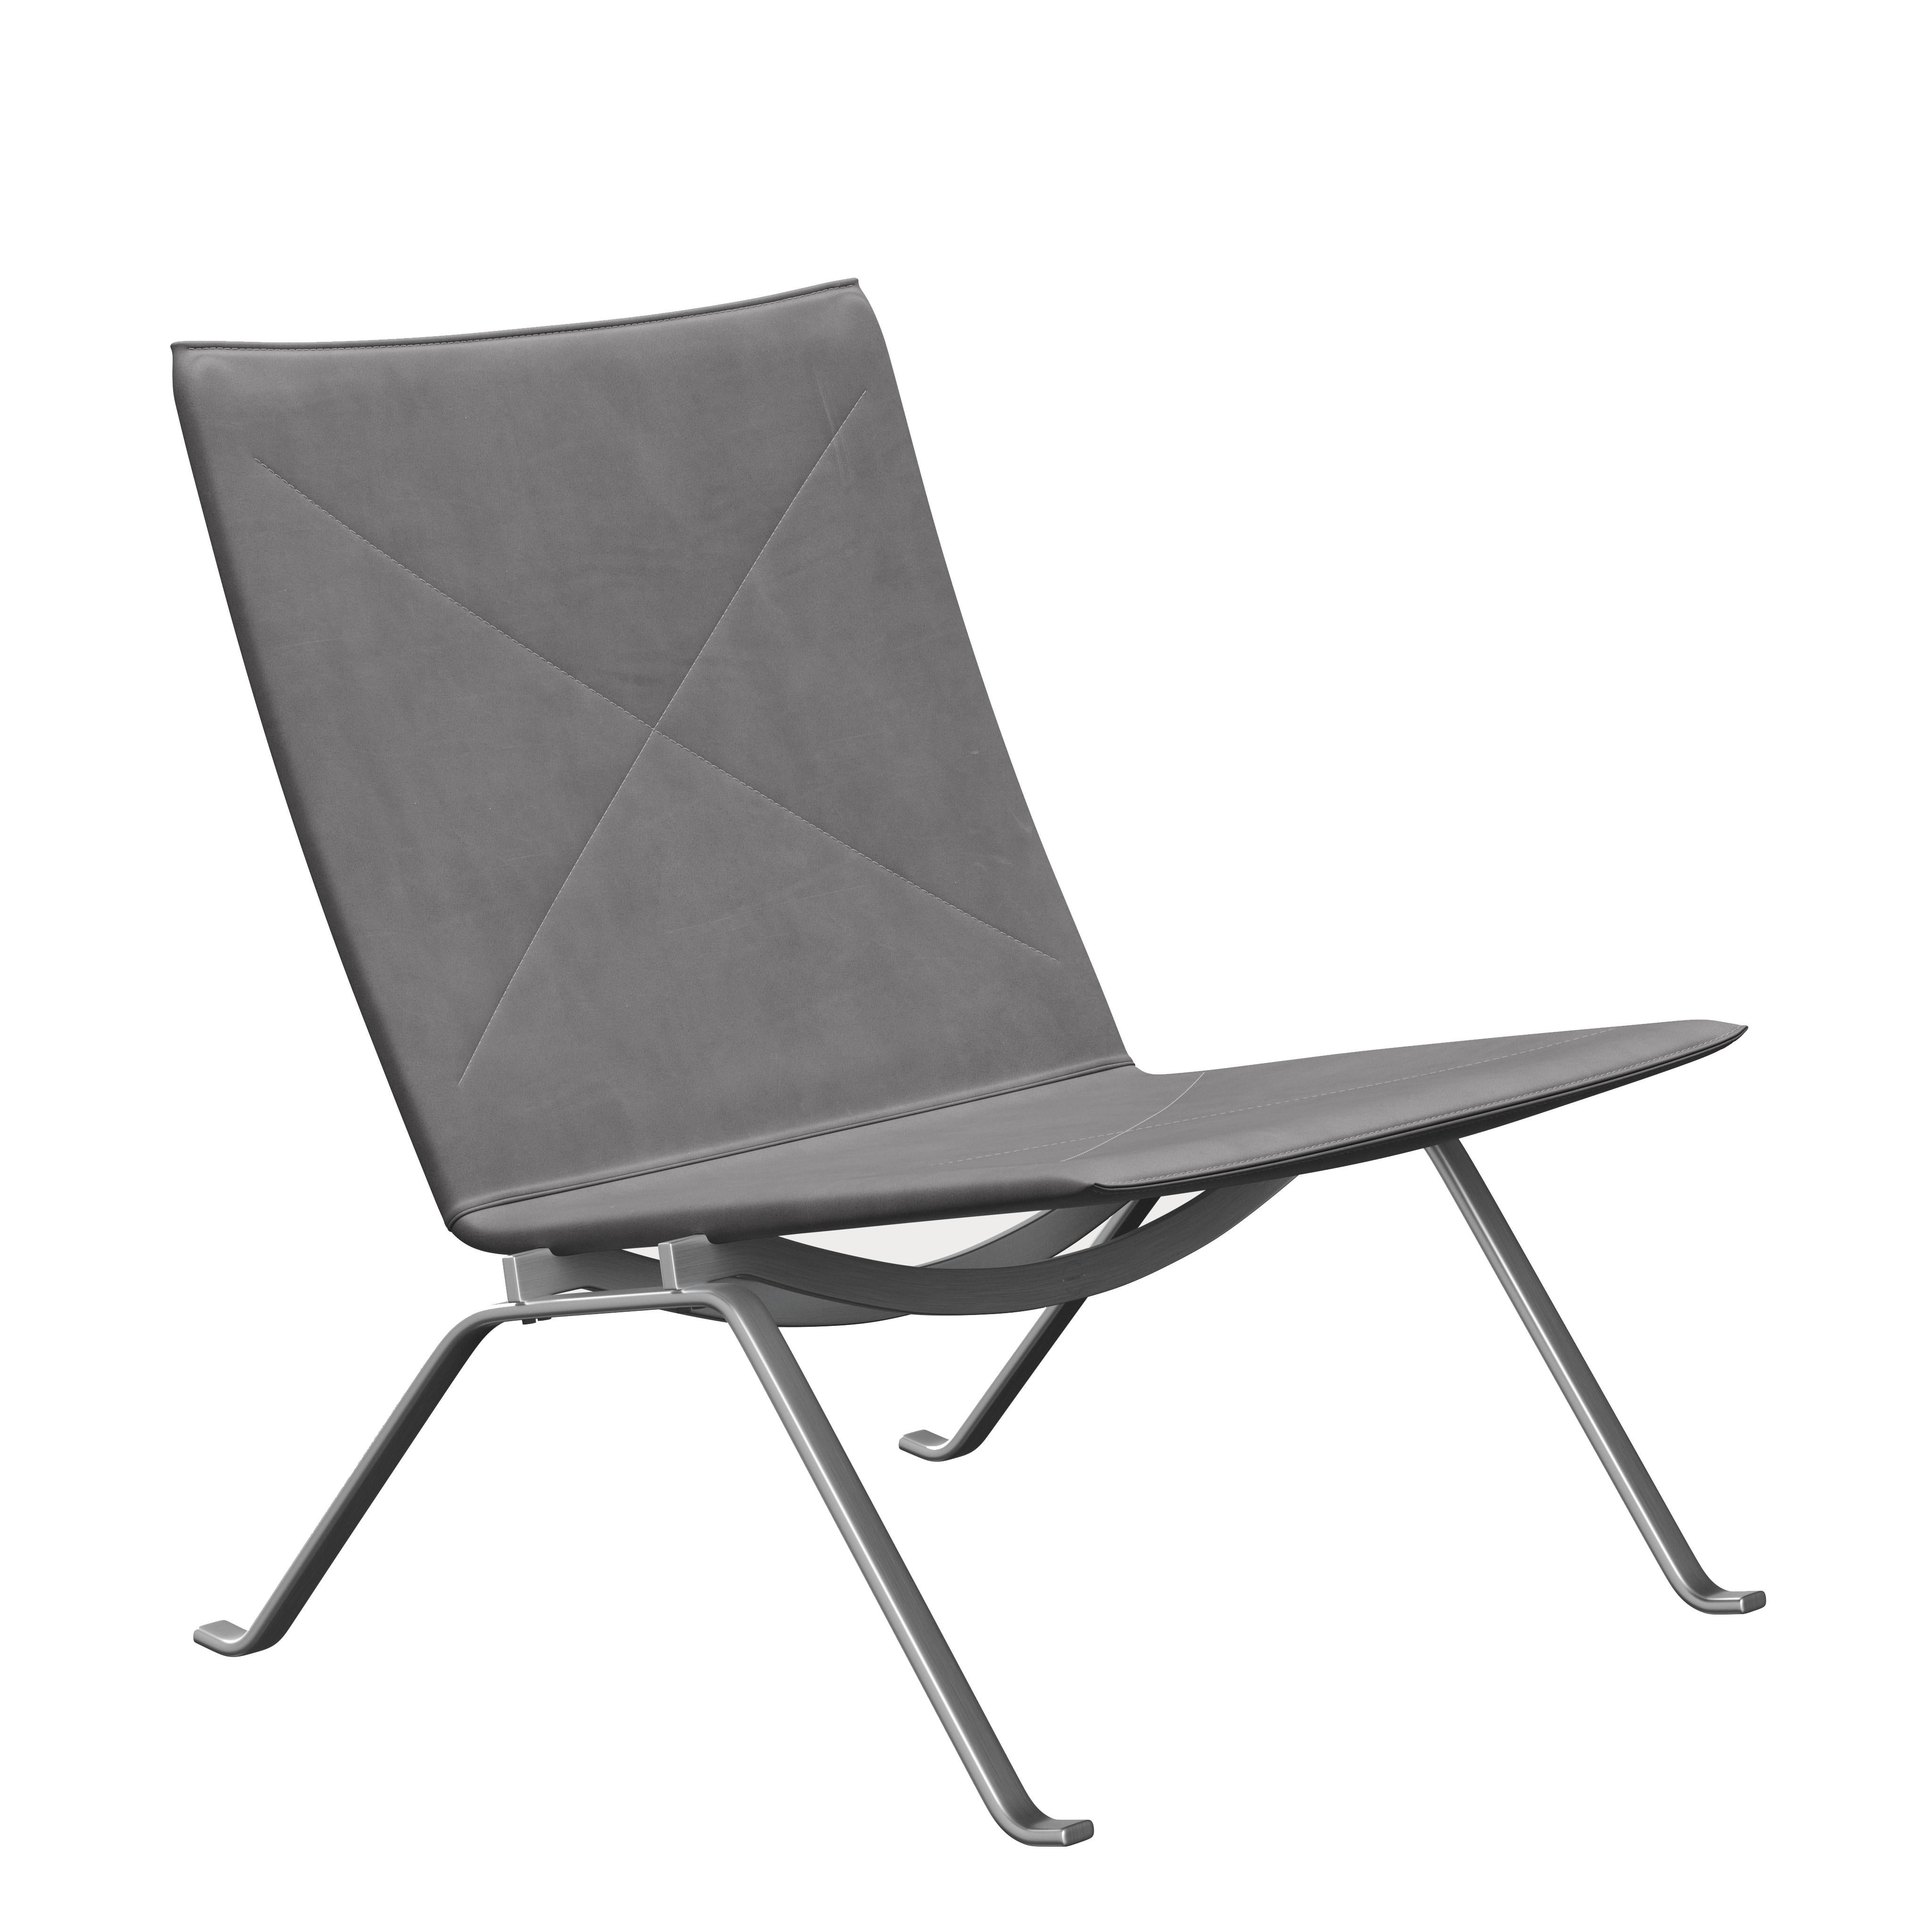 Poul Kjærholm 'PK22' Lounge Chair for Fritz Hansen in Leather (Cat. 5) For Sale 5